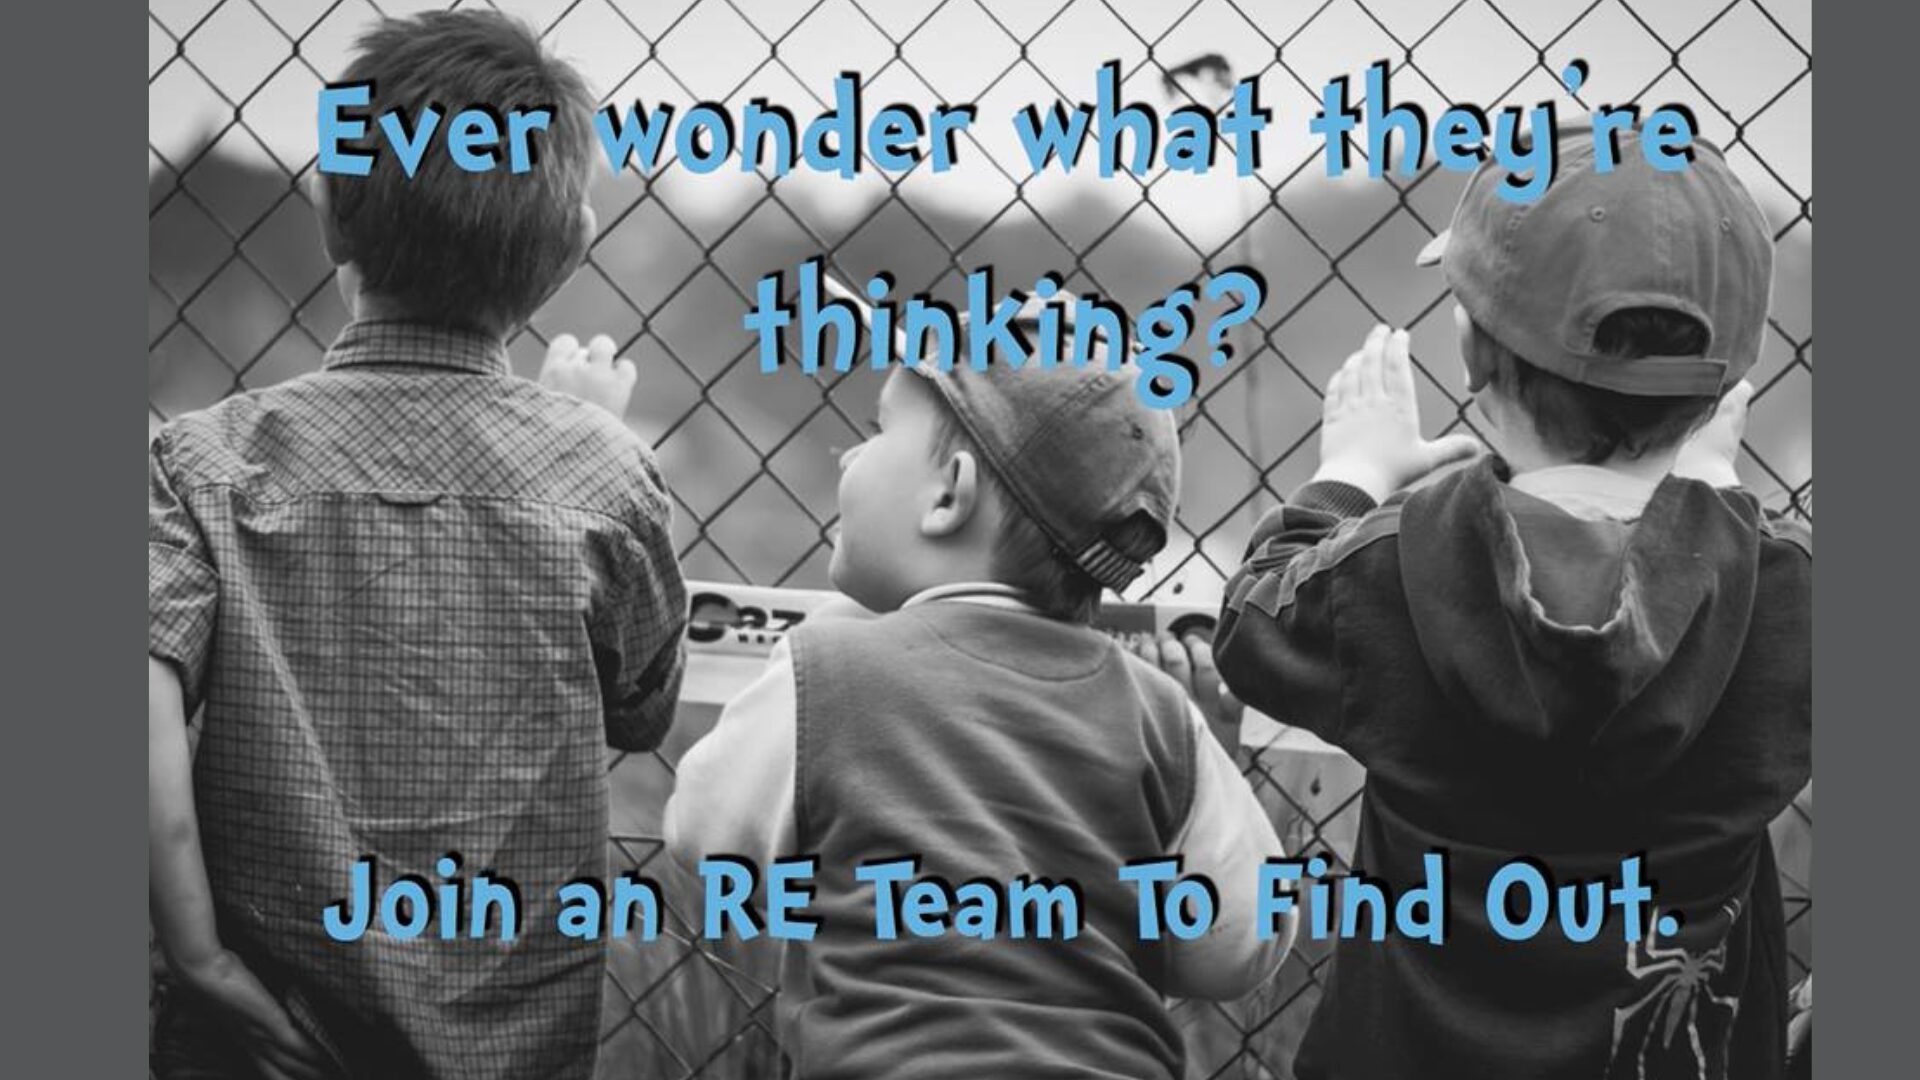 back view of three children looking through a chain link fence. Text reads "Ever wonder what they're thinking? Join an R.E. team to find out."